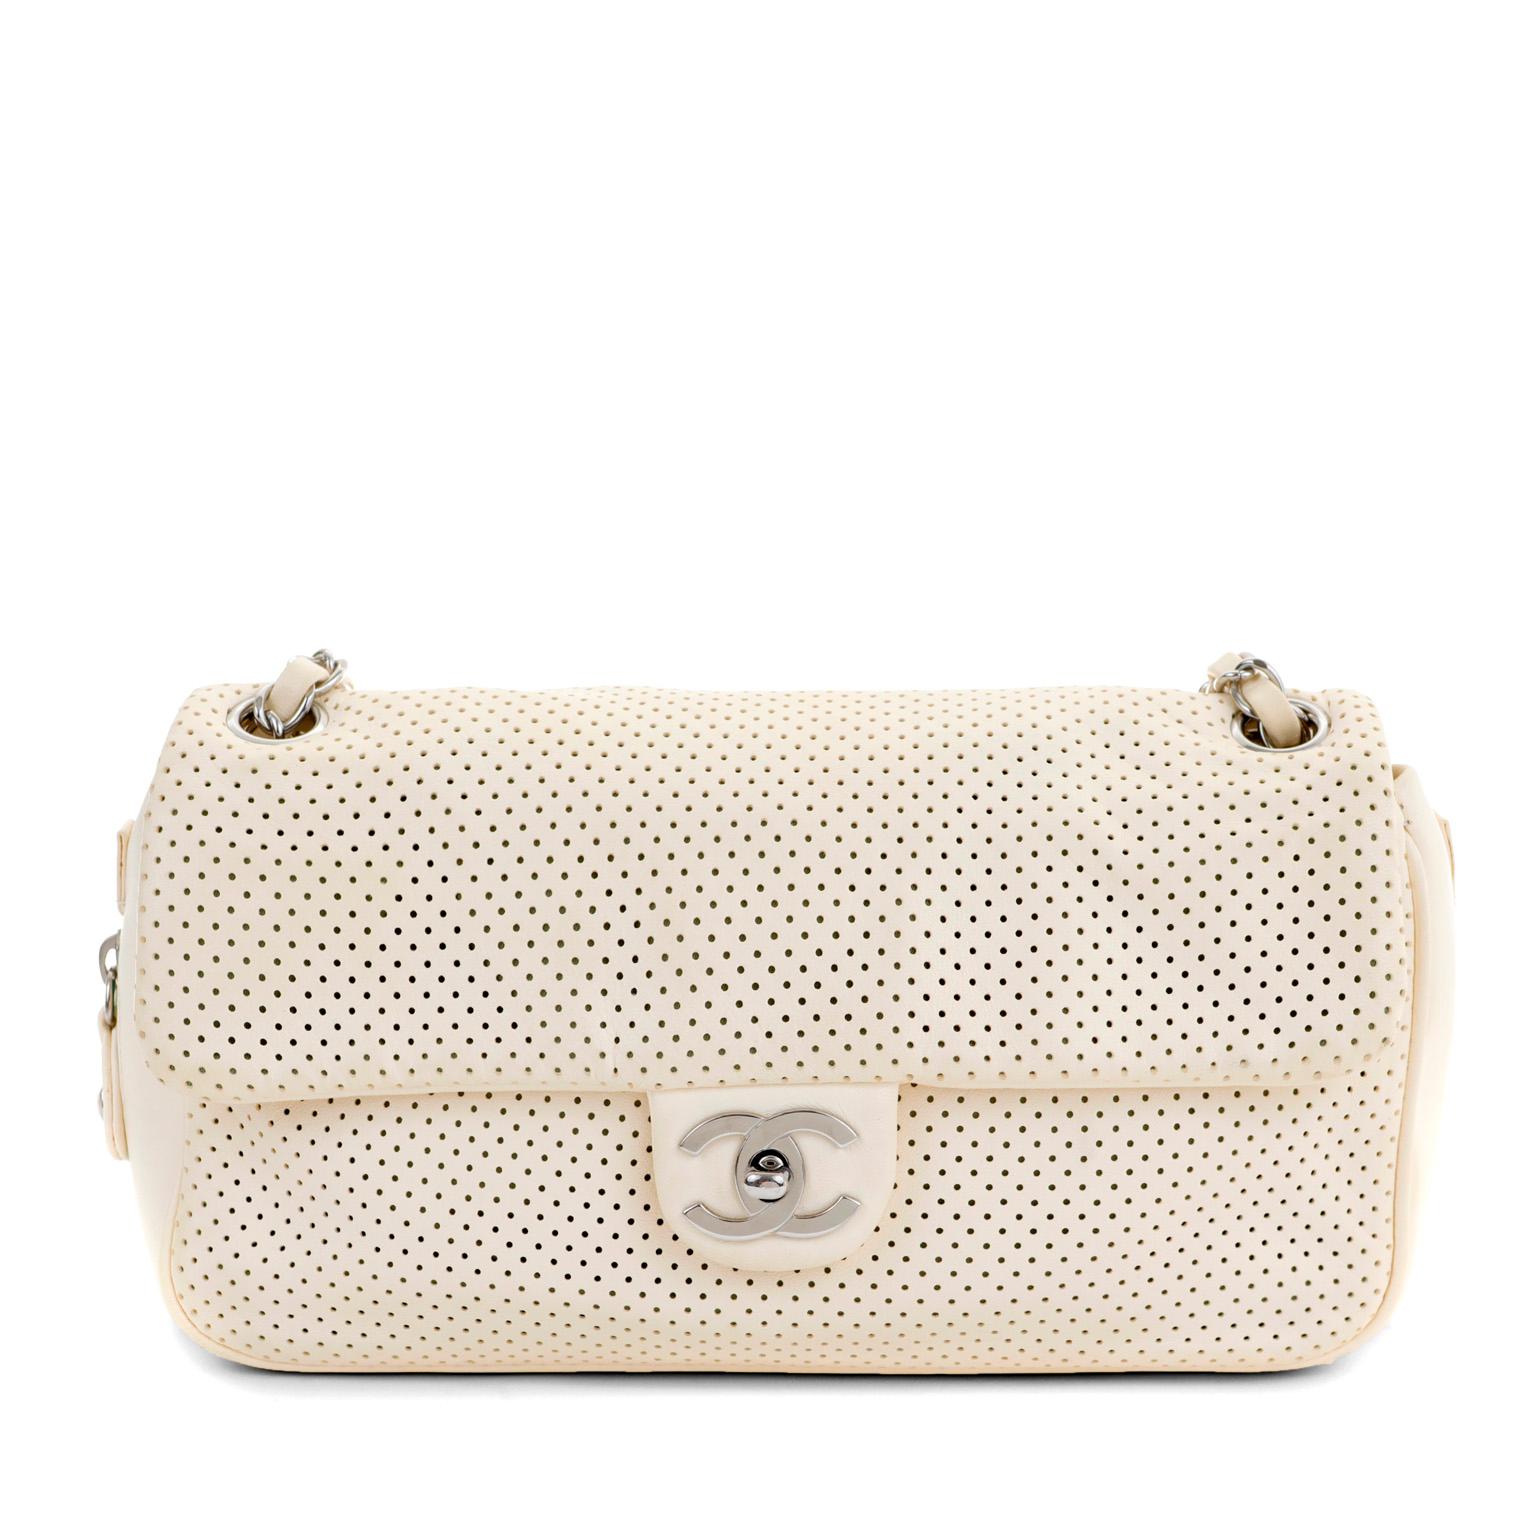 This authentic Chanel Pale Yellow Perforated Leather Baseball Spirit Flap Bag is in excellent plus condition. Perfectly scaled in the medium silhouette, this flap bag is ready to go anywhere day or evening.  Pale yellow perforated leather flap bag